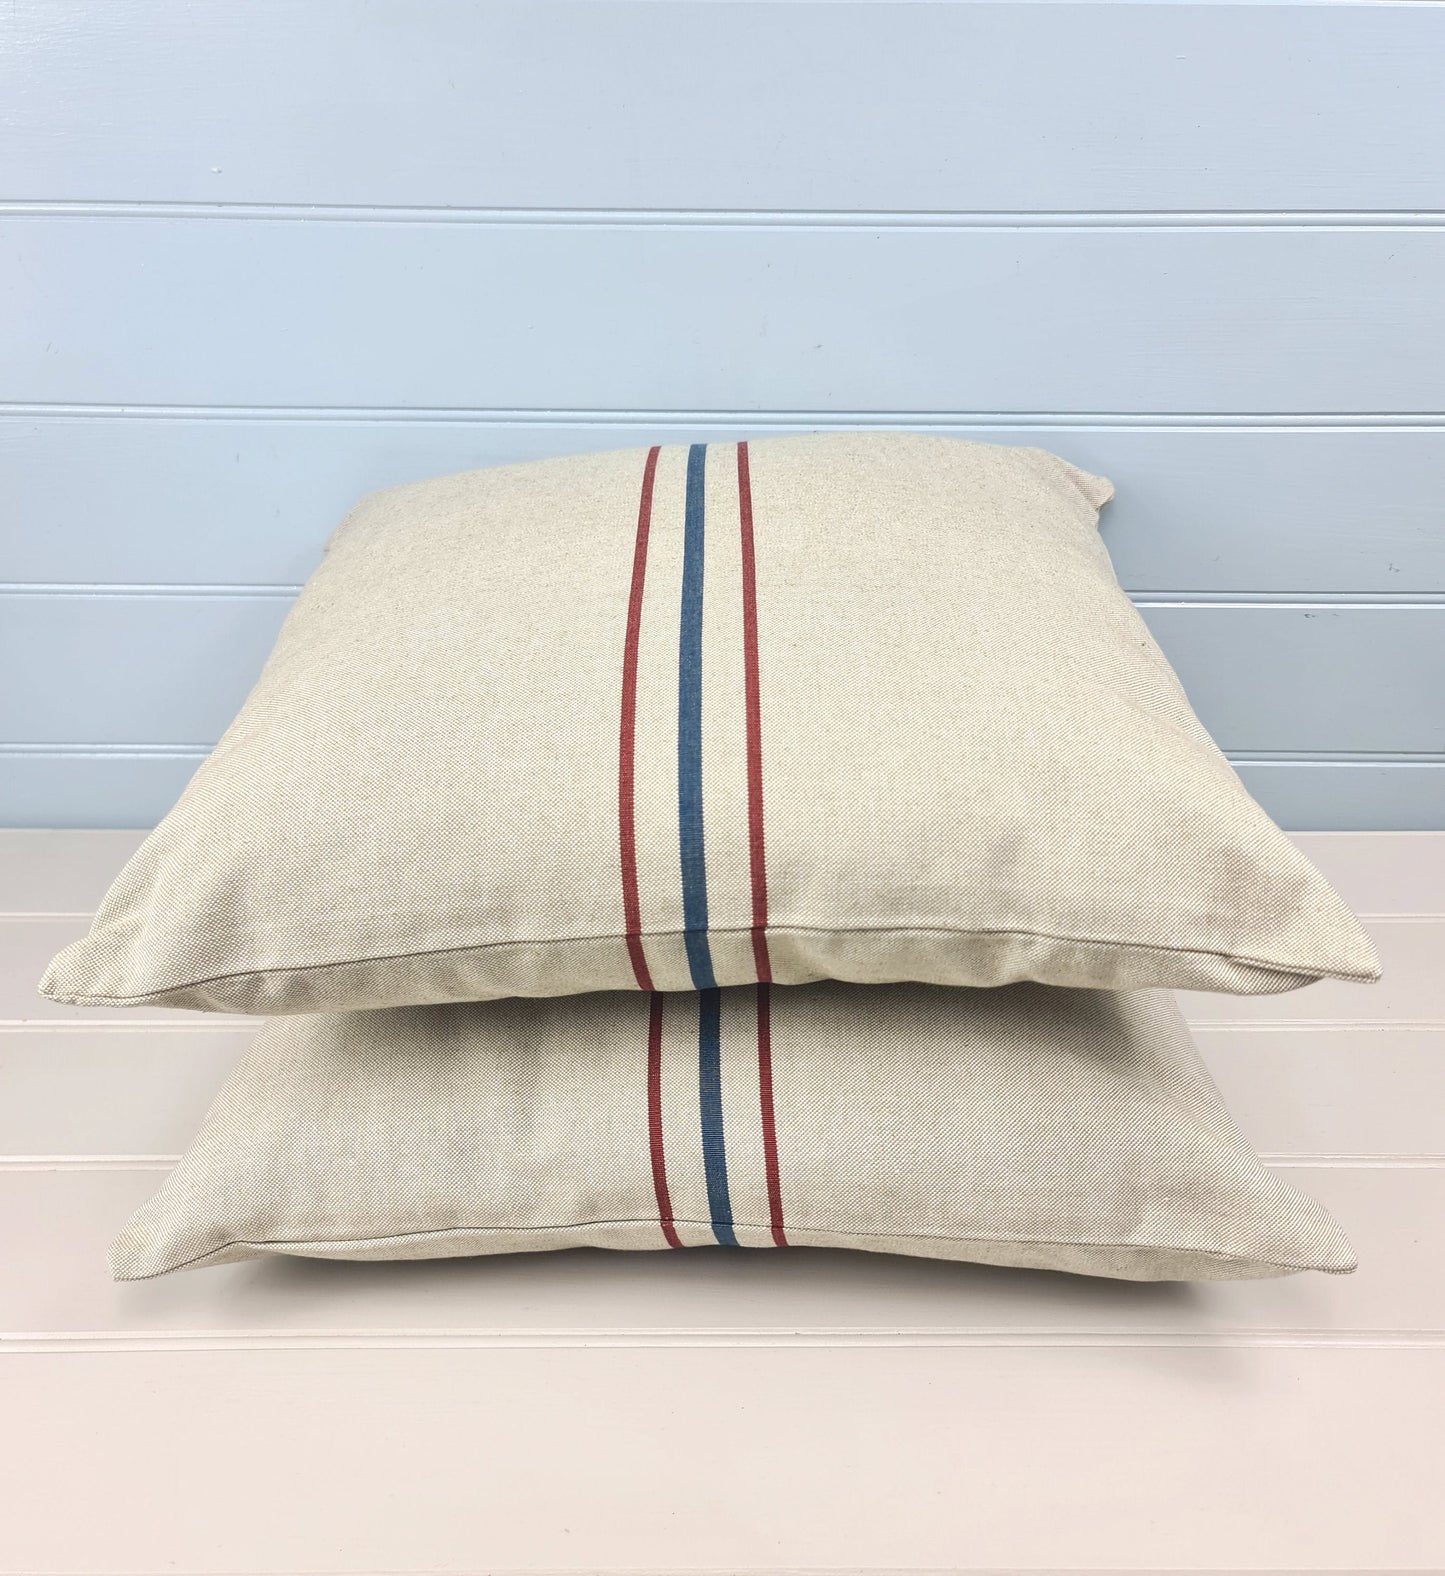 French striped cushion pillow cover 18in 45cm sq Traditional red and navy nautical stripes on premium cream cotton Heavy duty Double sided